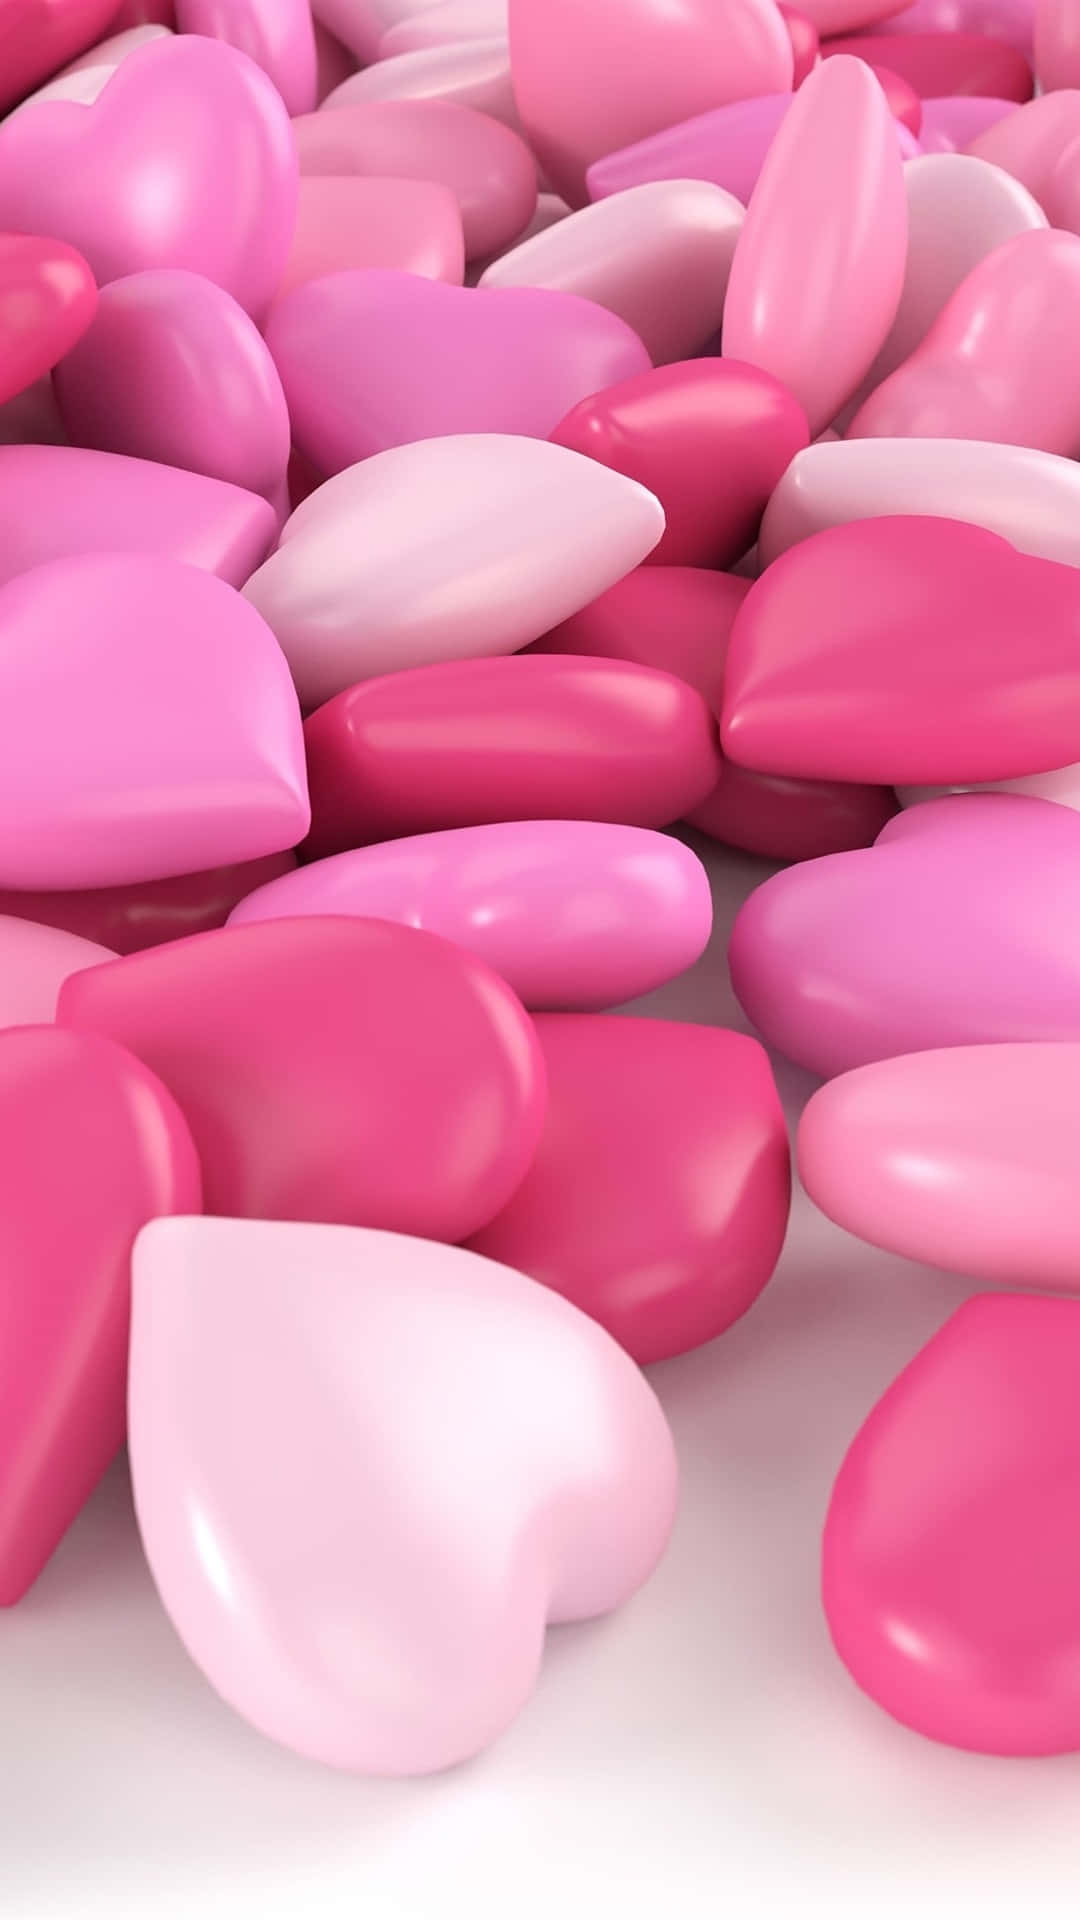 Delectable Pink Candies Wallpaper